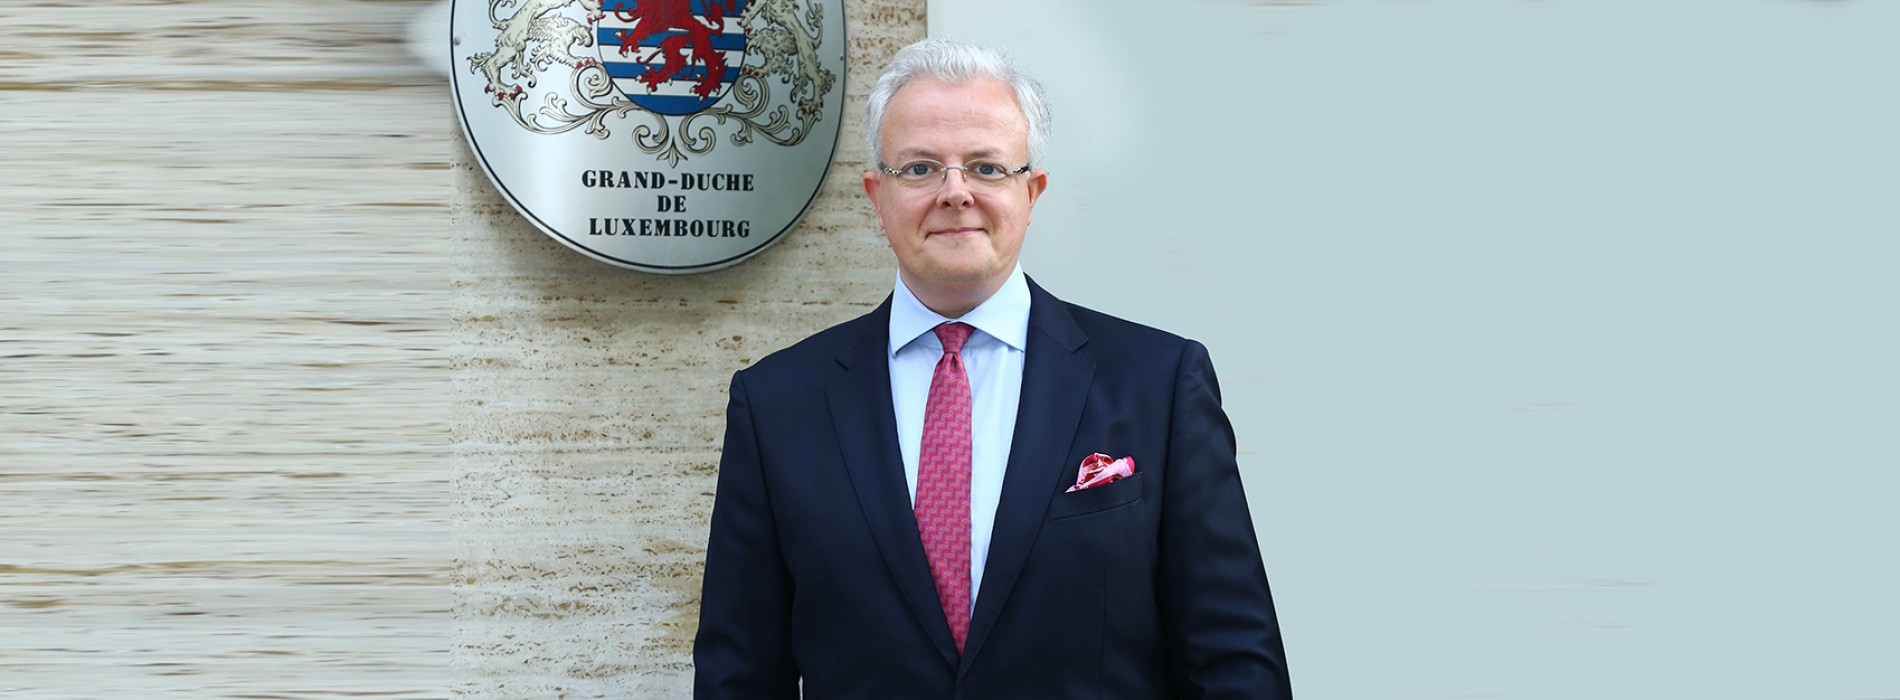 Looking forward to welcoming more Indians: Luxembourg’s Ambassador